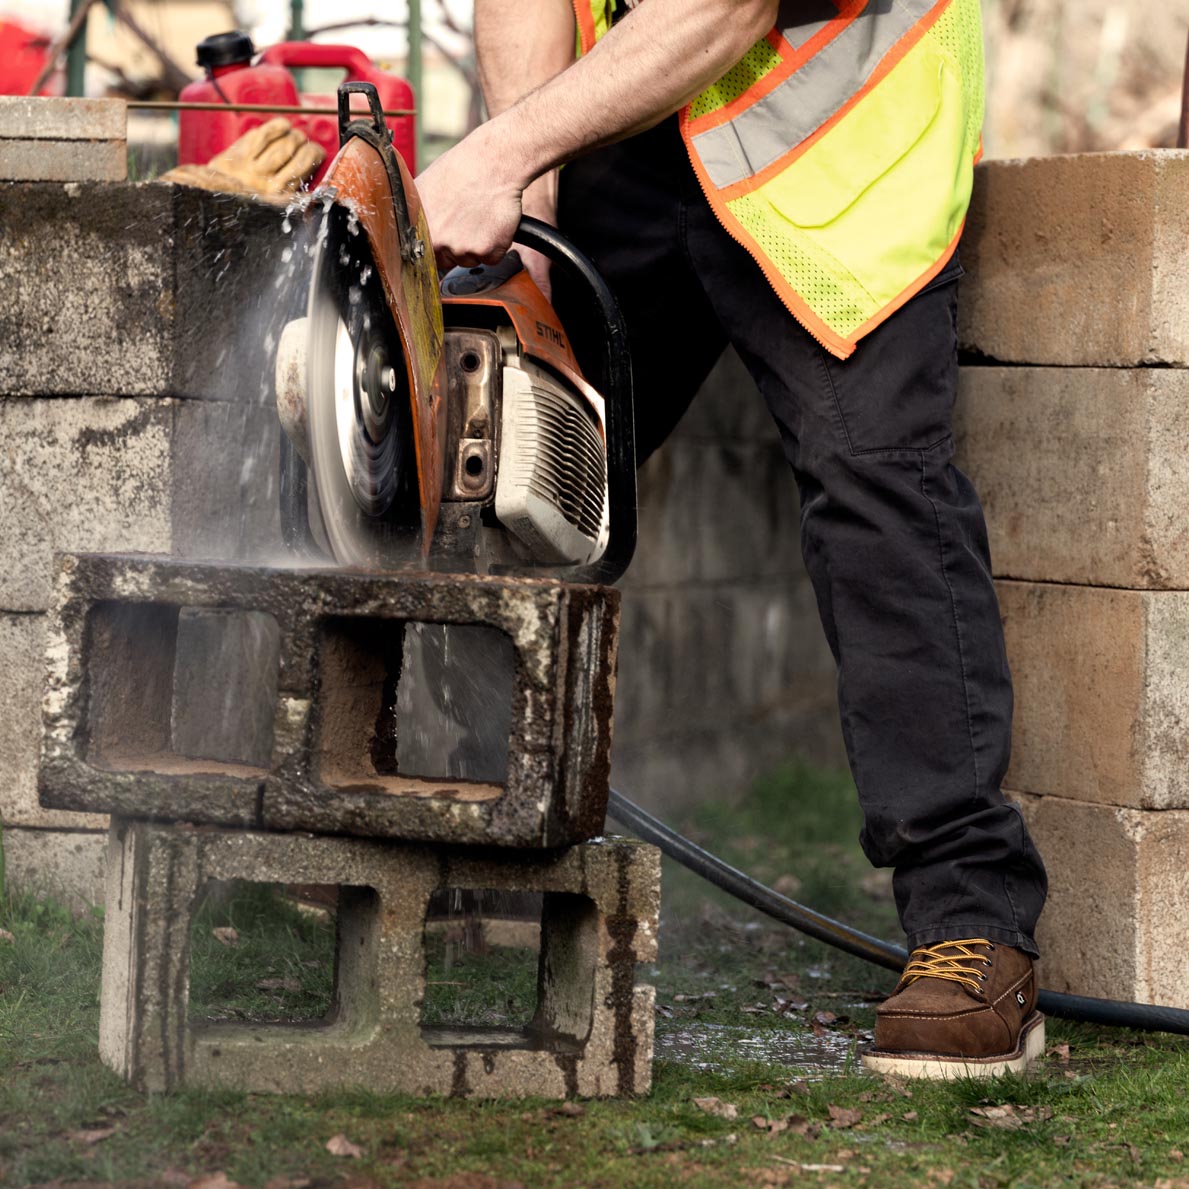 ENGINEERED FOR WORK - - - - -  All-Day Comfort, Durability & Fit  Whether you’re a contractor, carpenter, electrician, landscaper, plumber, or just a local handyman… Craftsmanship is found in every step of our unlined leather work boots. By focusing on fi